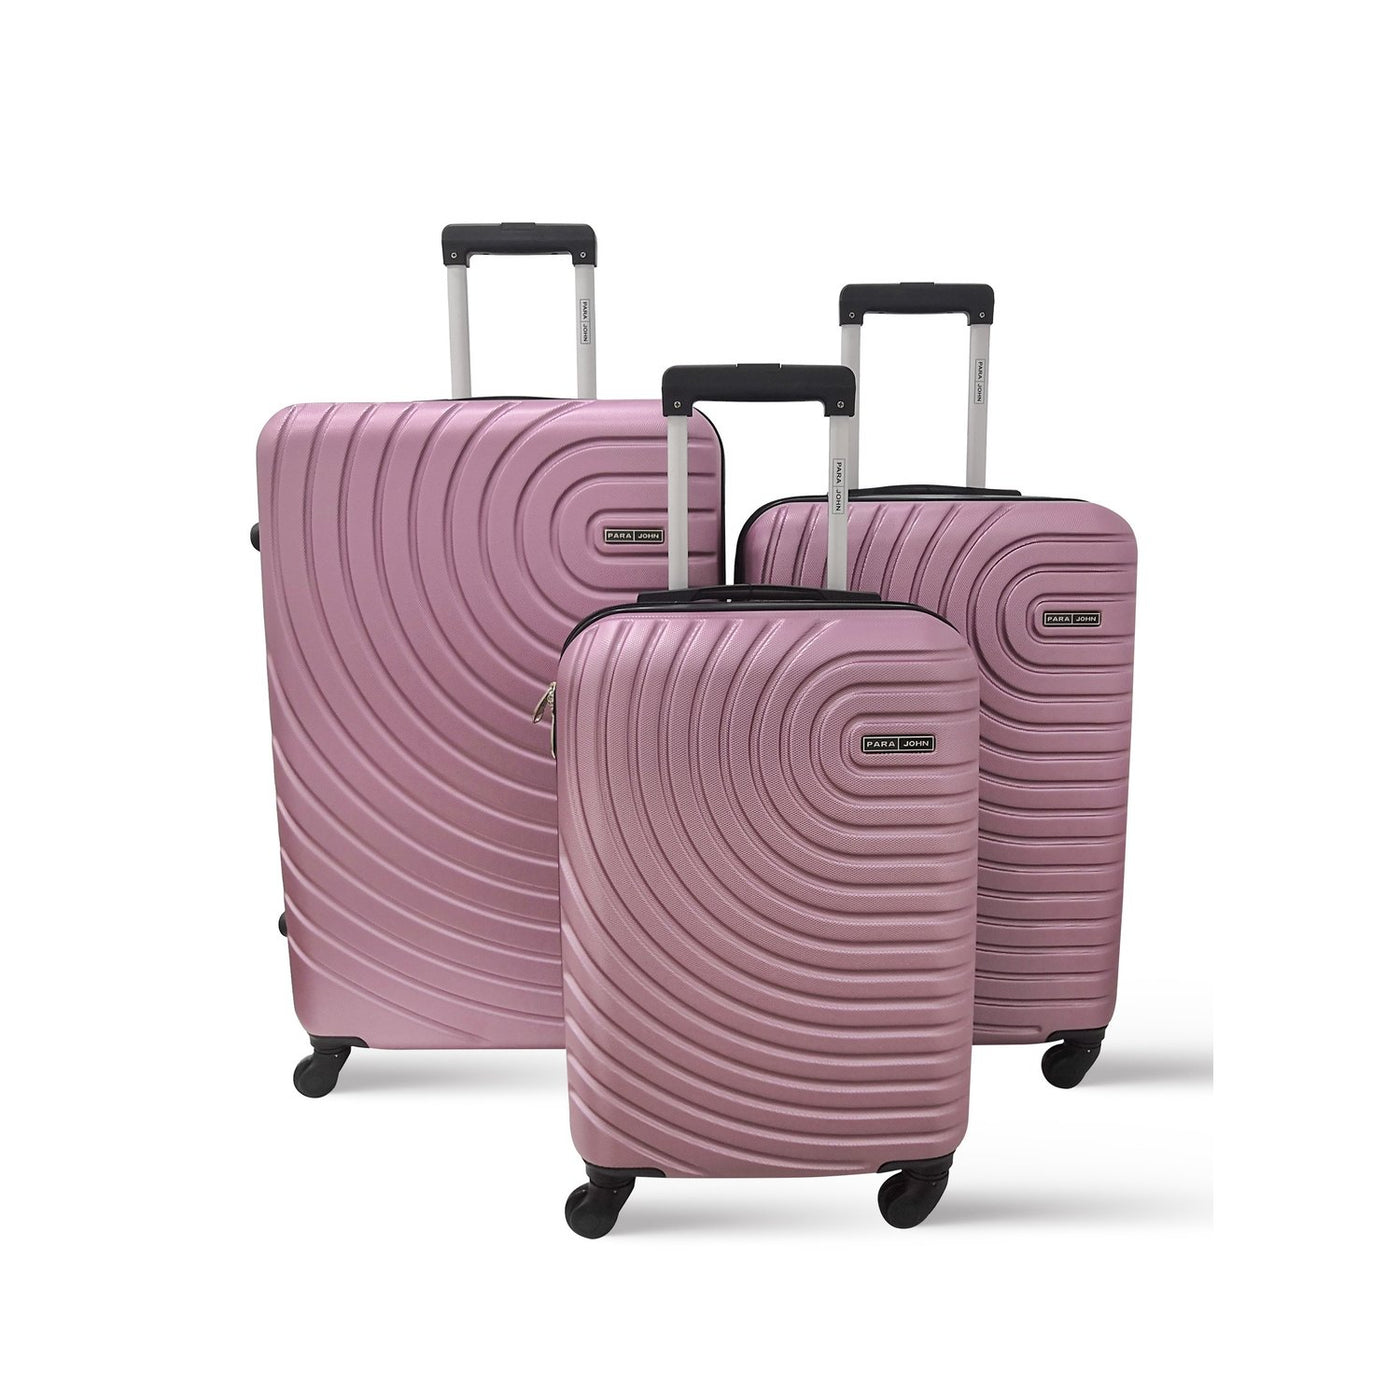 Kenzo 3-Piece ABS Hardside Spinner Luggage Trolley Set